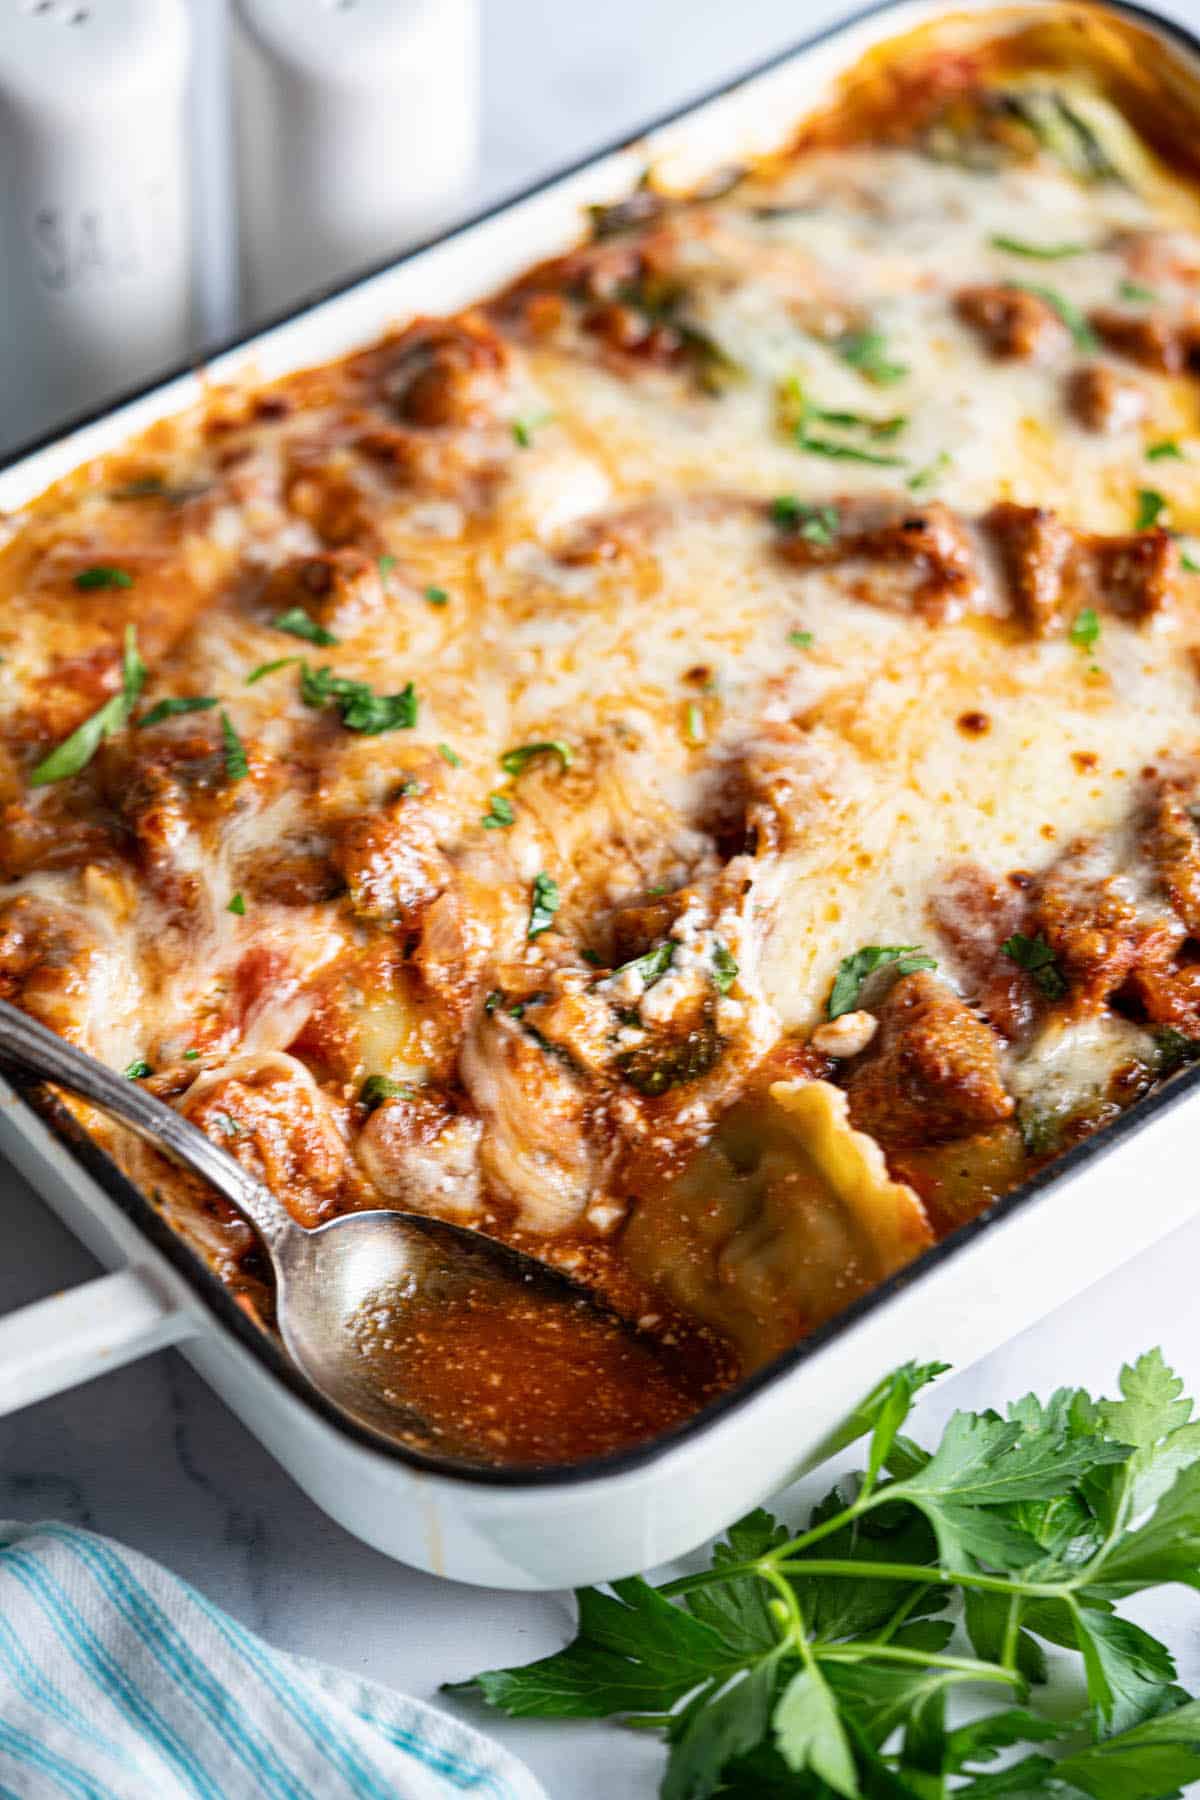 Ravioli Casserole in a baking dish, with a serving spoon.